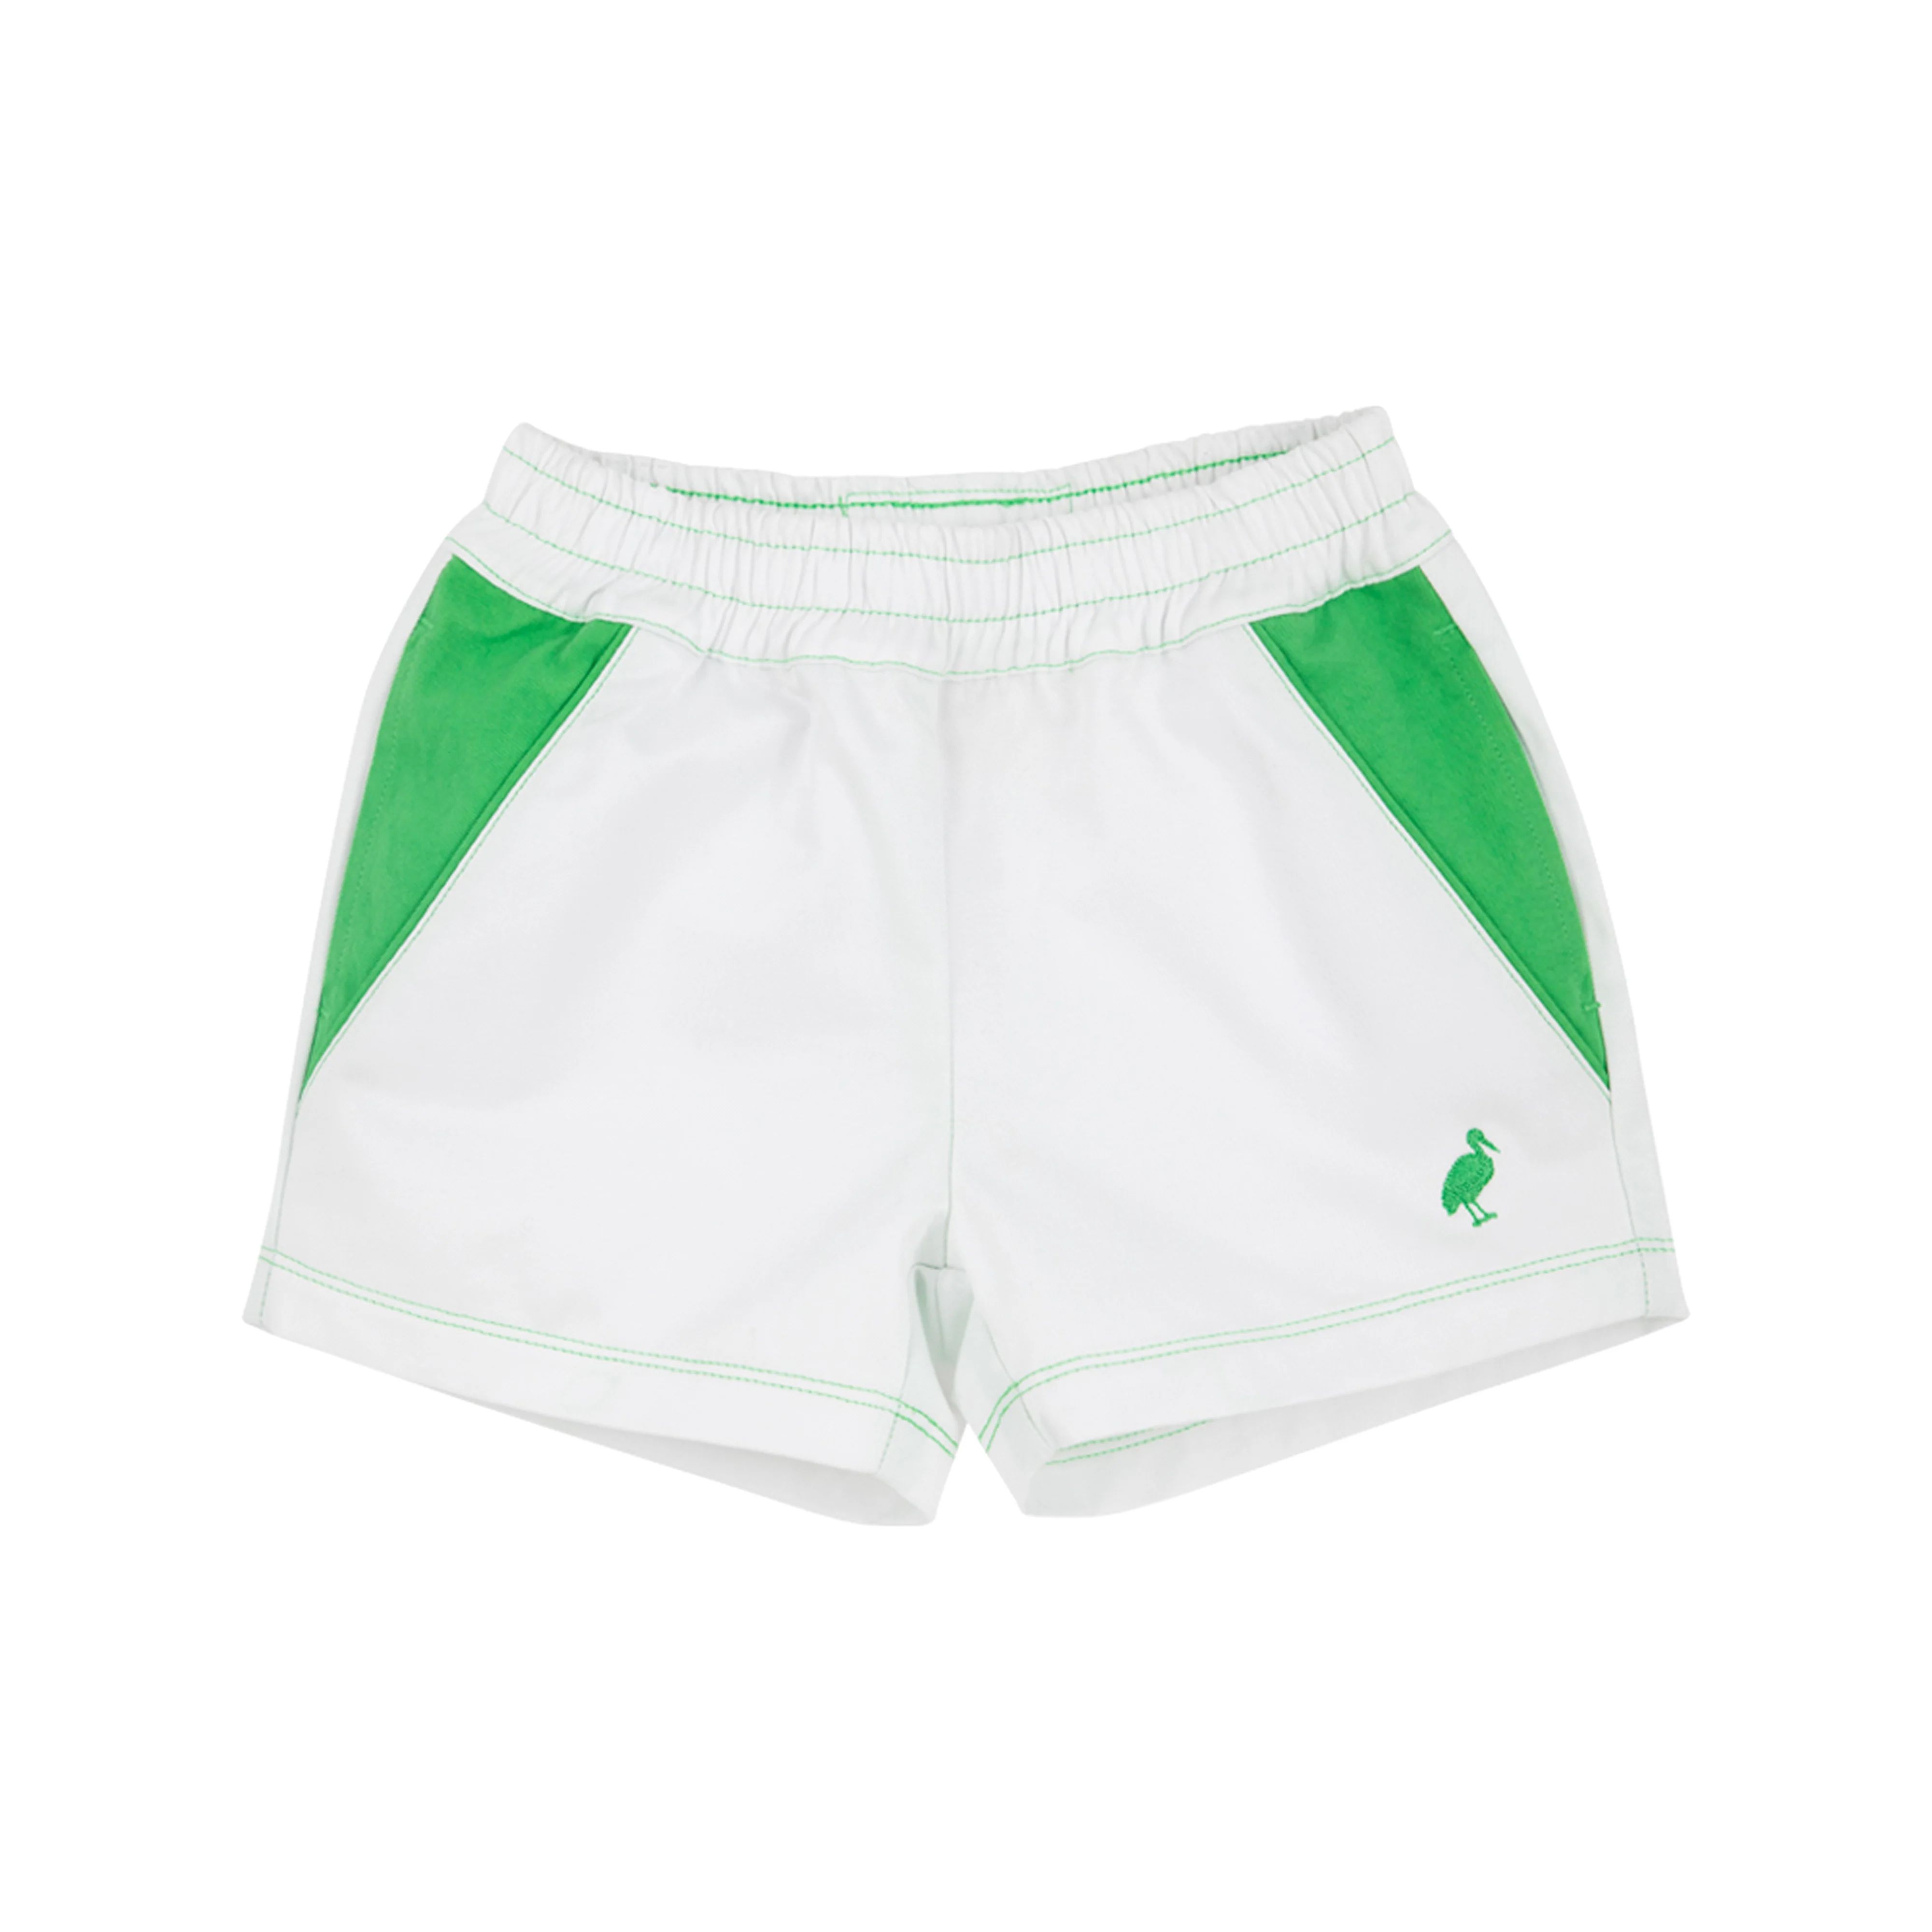 Schroeder Shorts - Worth Avenue White with Grafton Green Stork | The Beaufort Bonnet Company